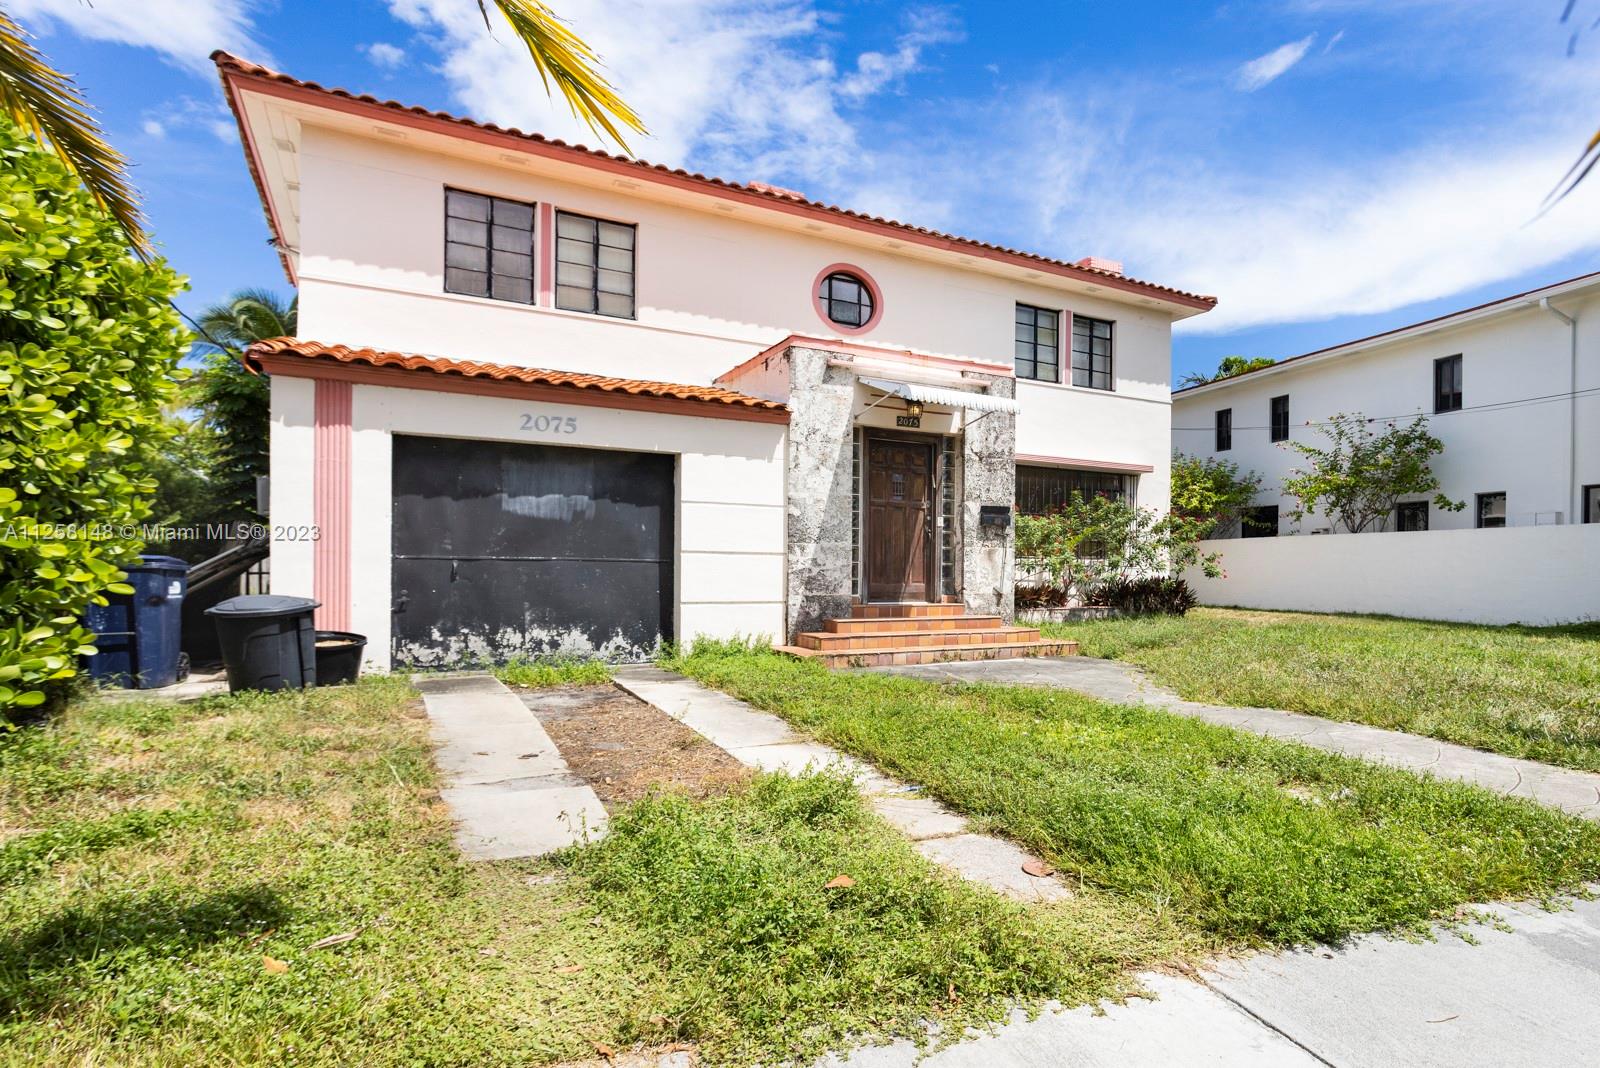 This rare find makes an excellent opportunity to renovate or build your dream home on North Bay Road and live amongst the most esteemed homes in Miami Beach.